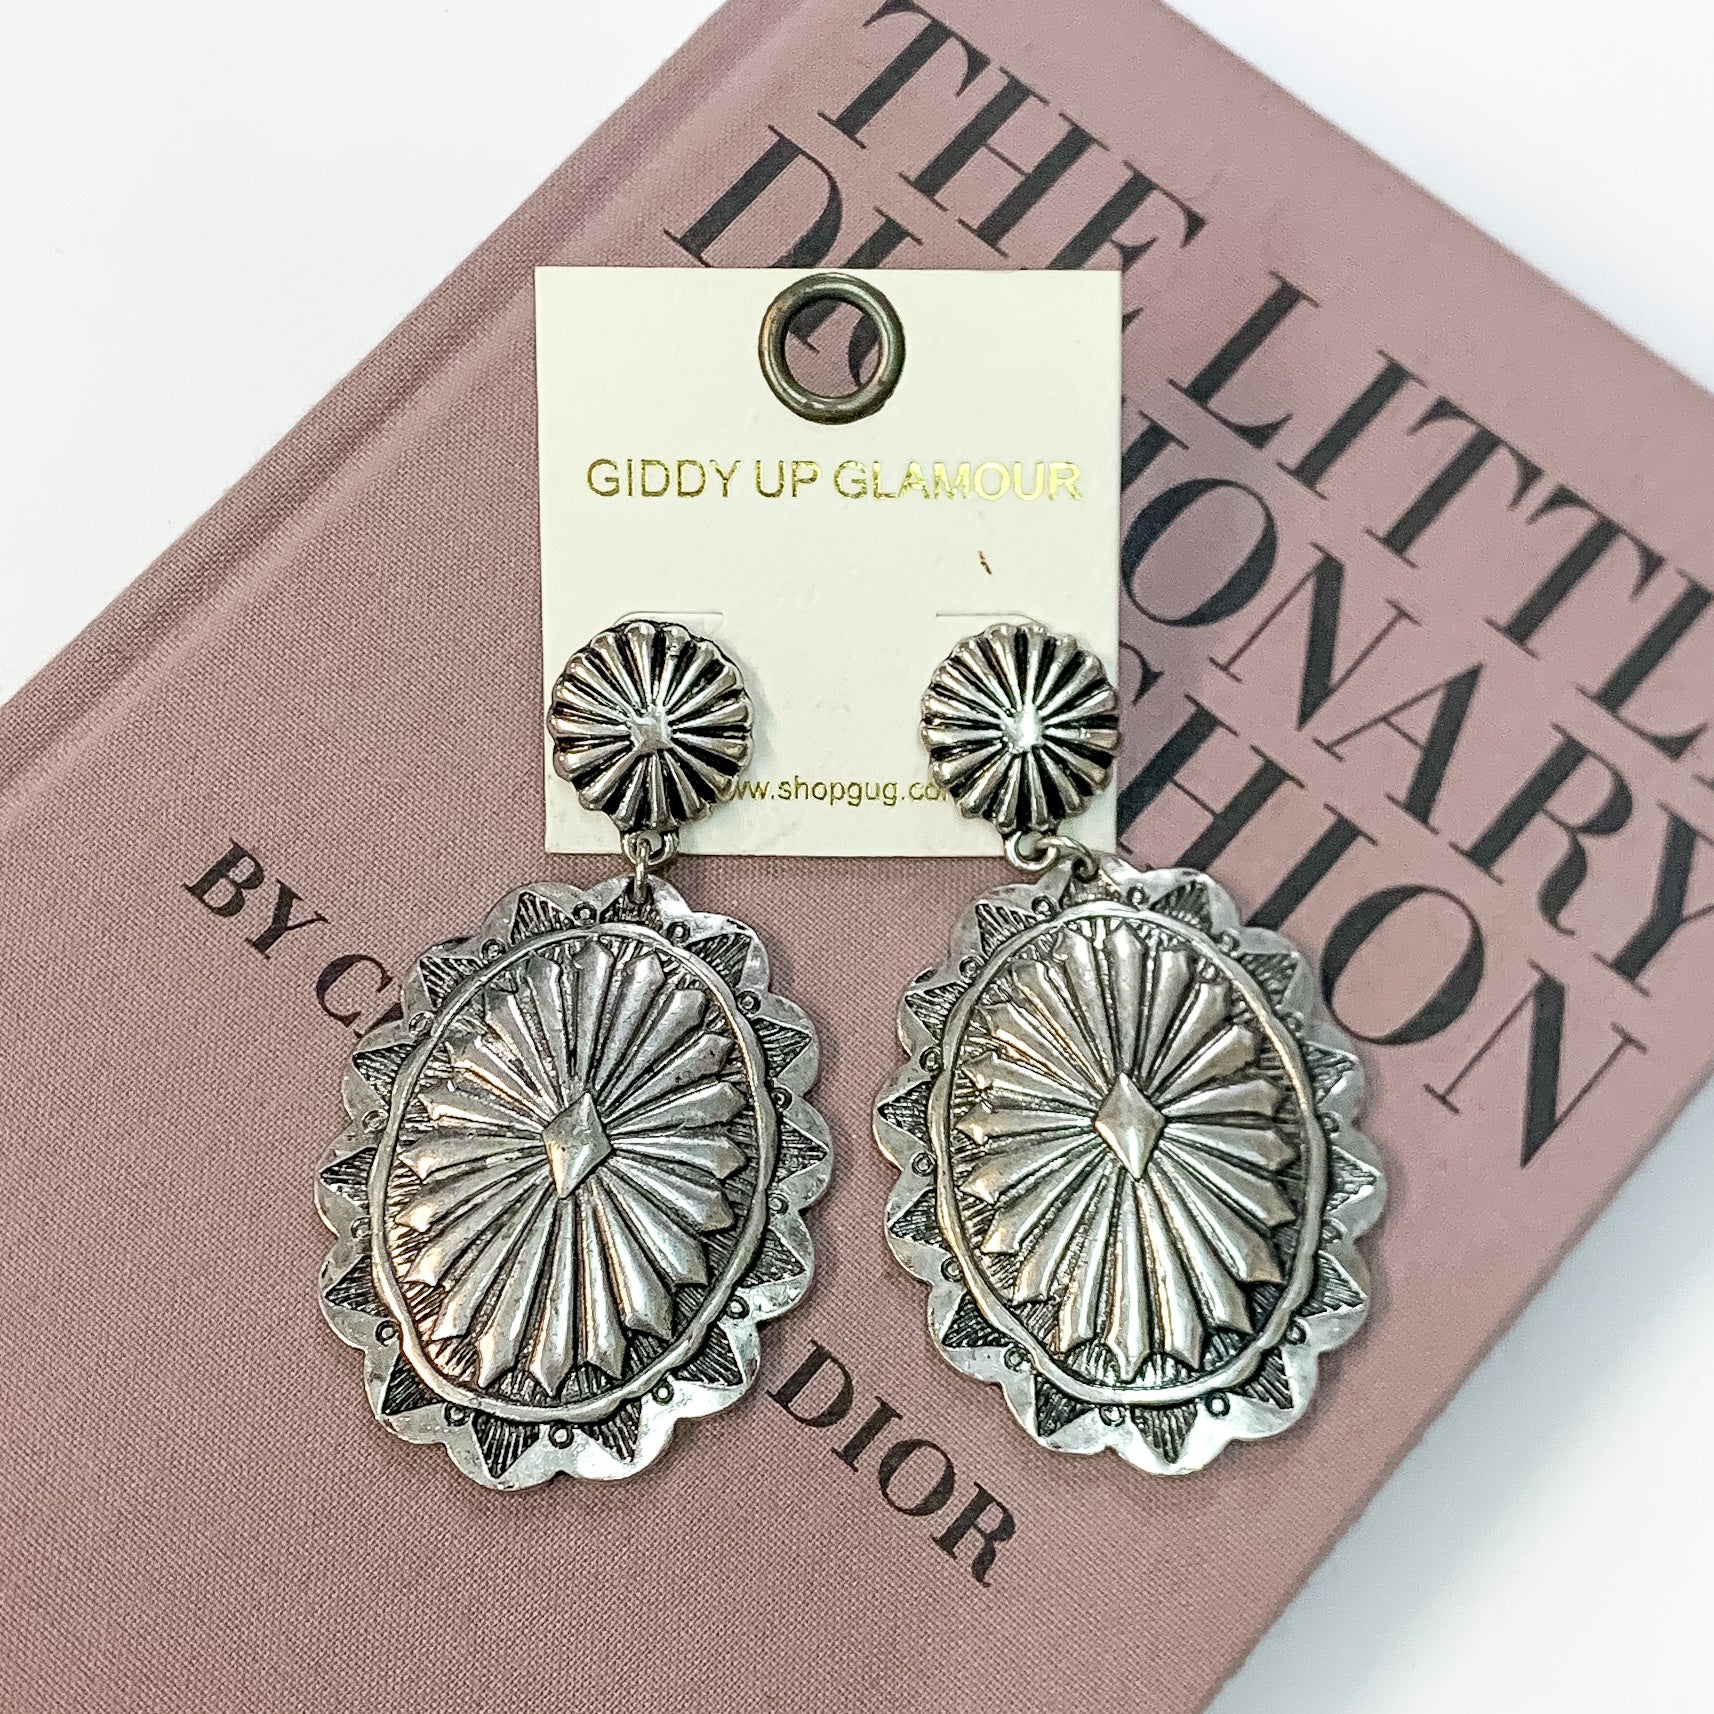 Oval Concho Post Earrings in Silver Tone - Giddy Up Glamour Boutique